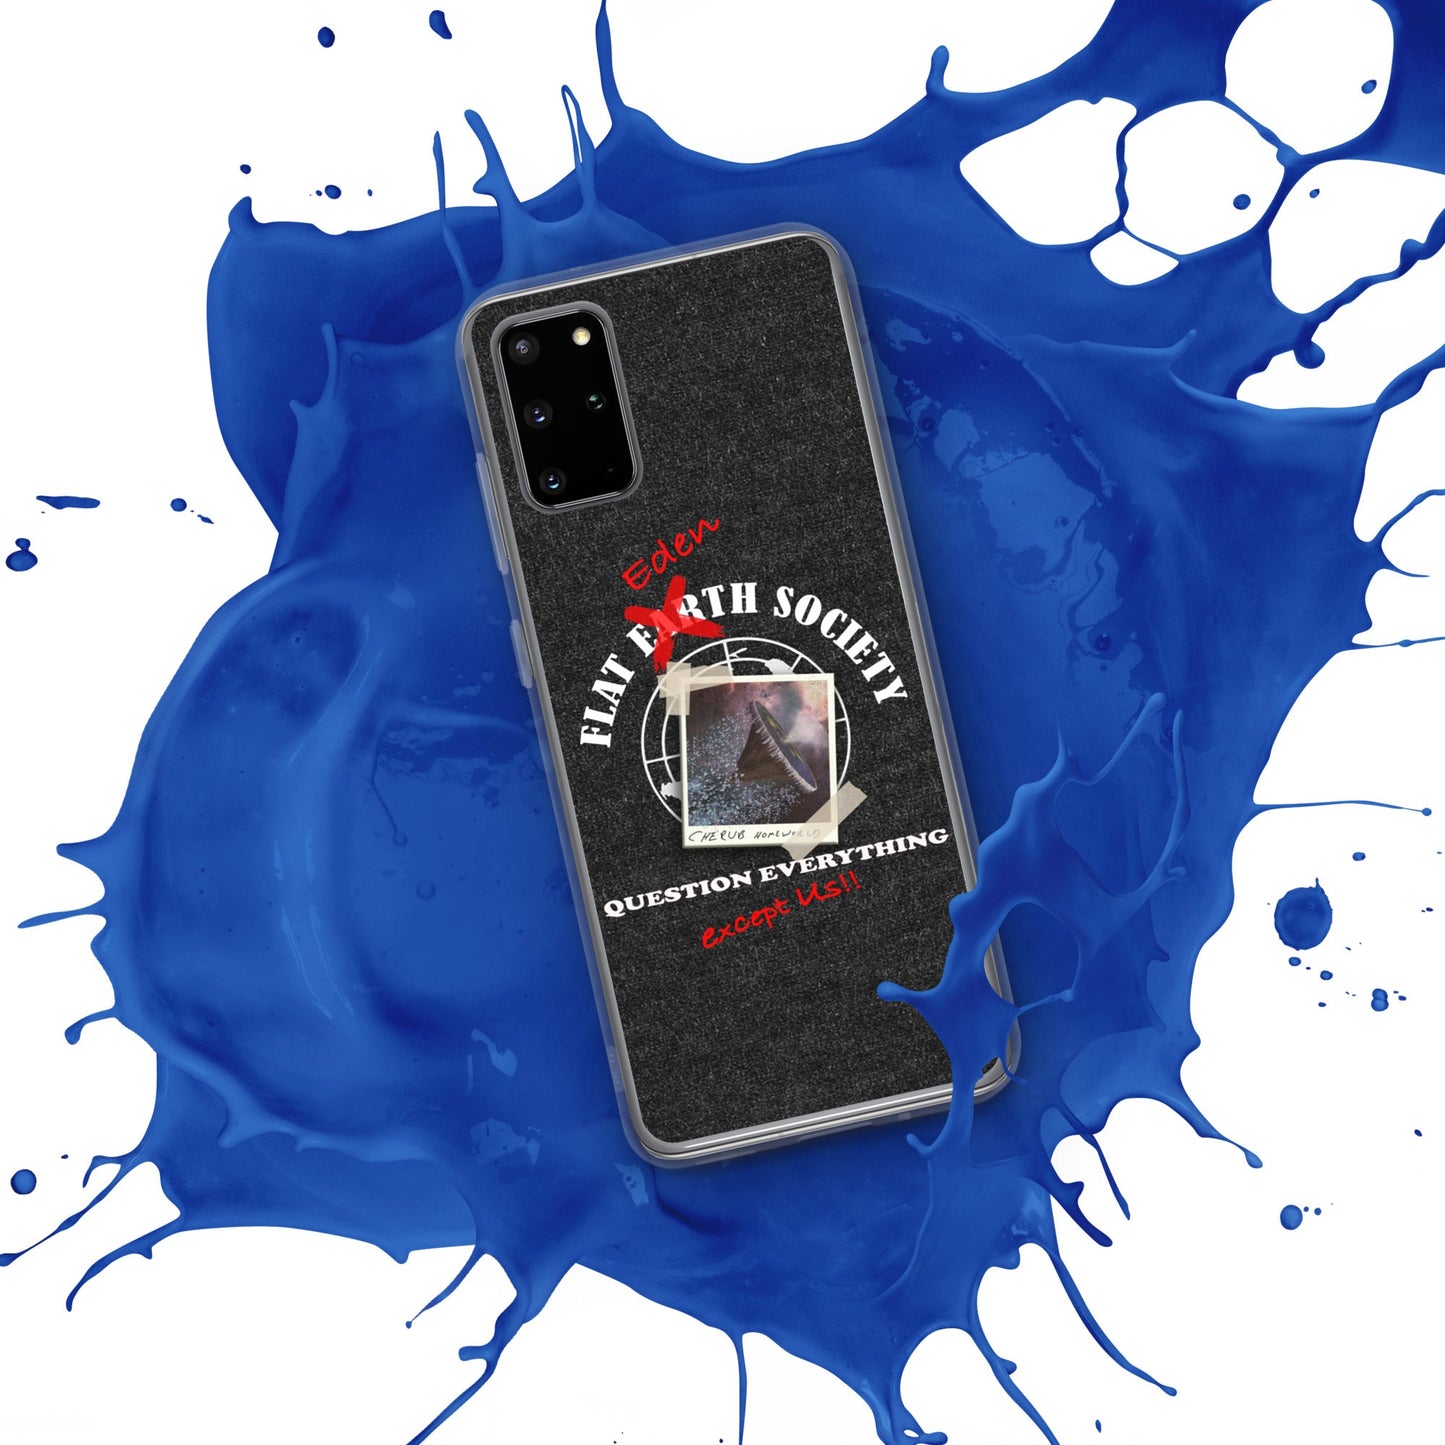 Samsung | Intergalactic Space Force 2 | Flat Eden Society - Spectral Ink Shop - Mobile Phone Cases -7213222_11348